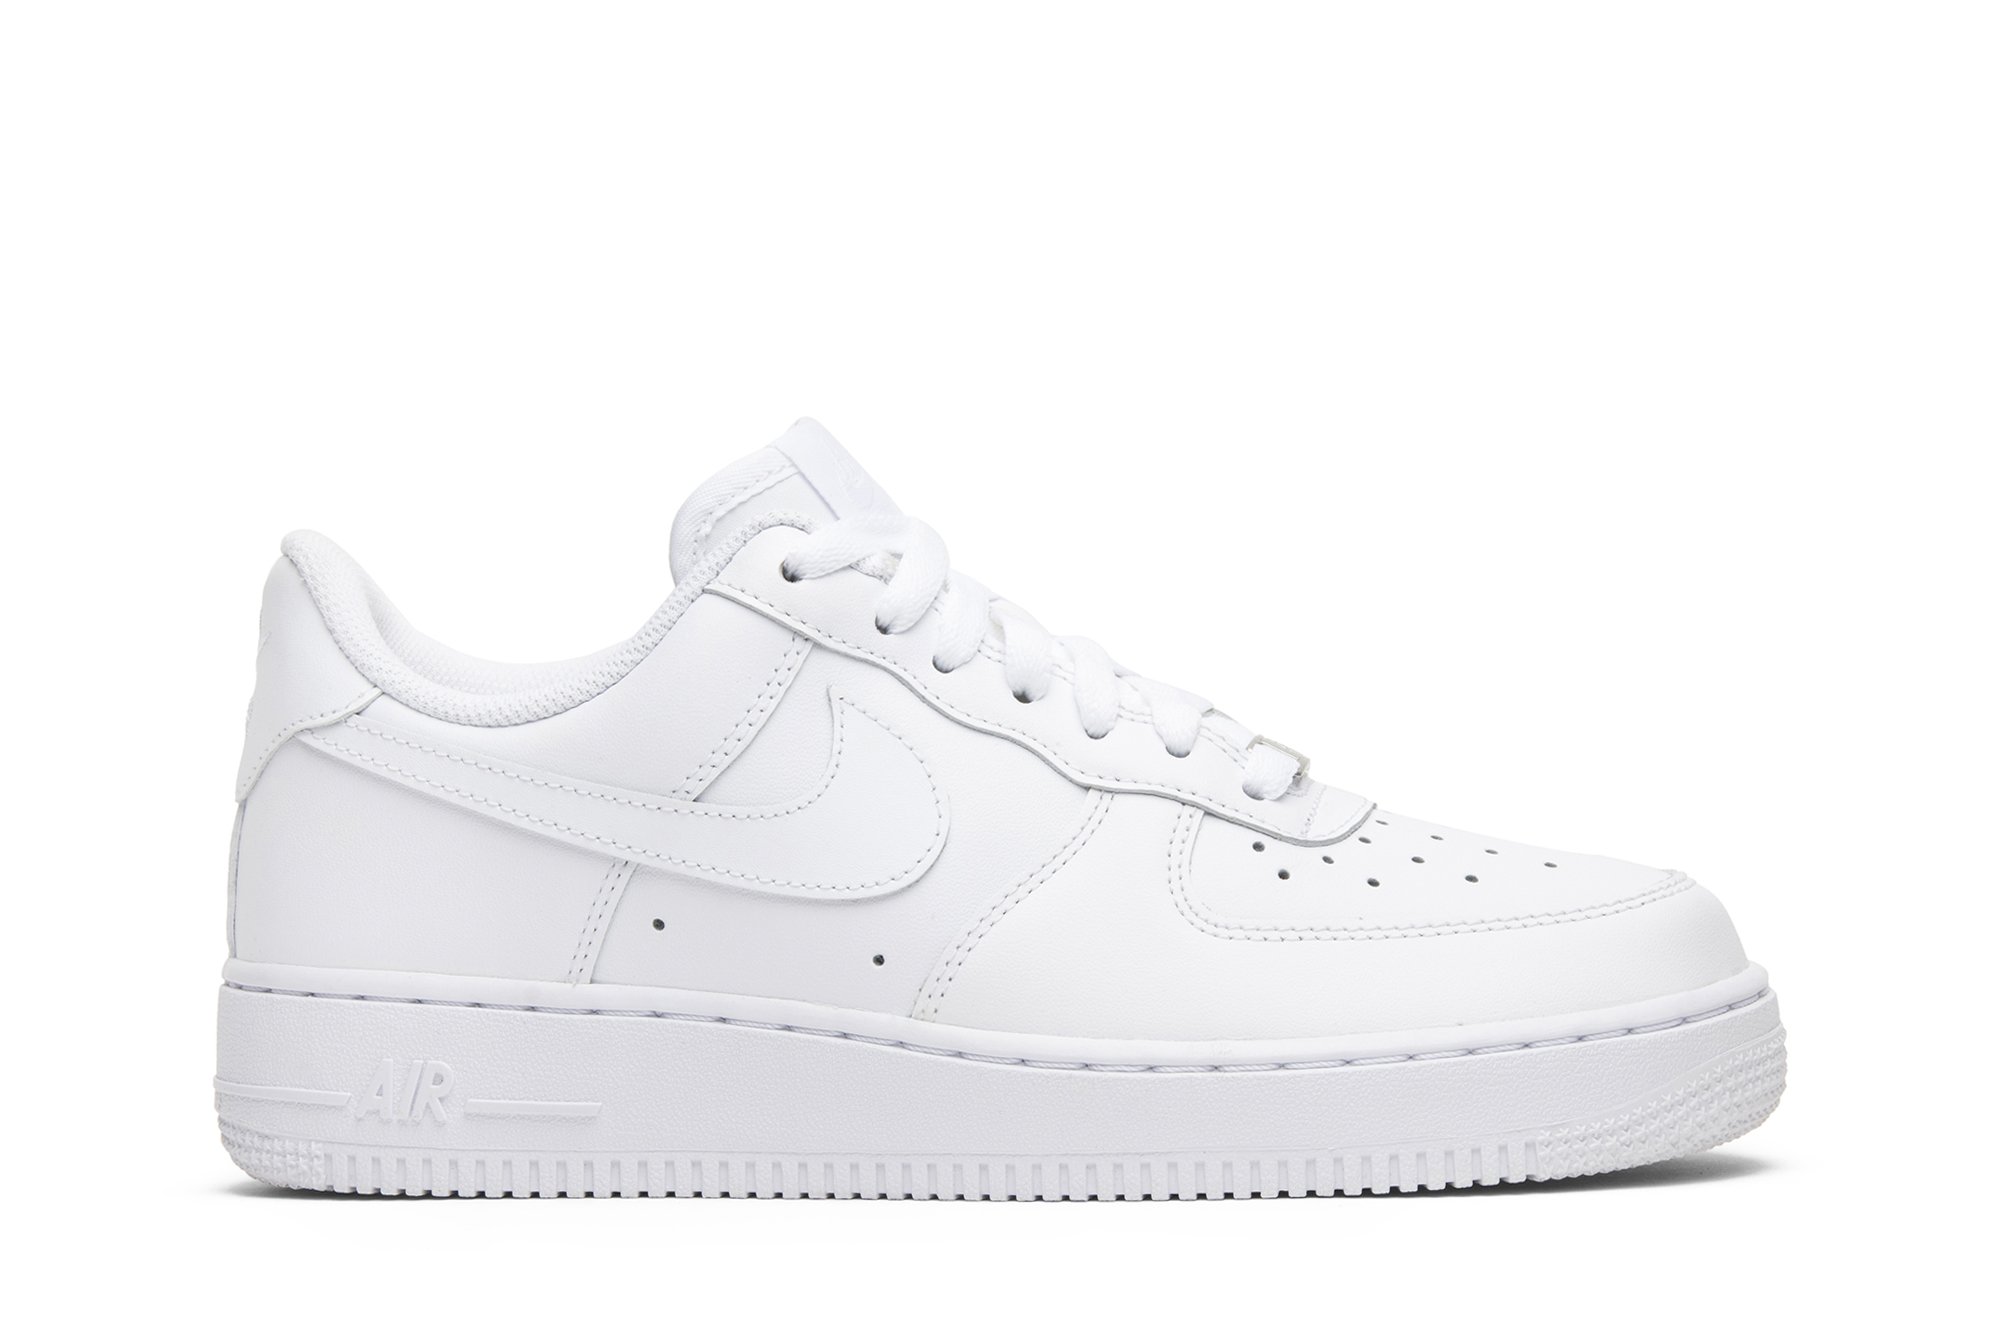 Buy Wmns Air Force 1 '07 'White' - 315115 112 | GOAT